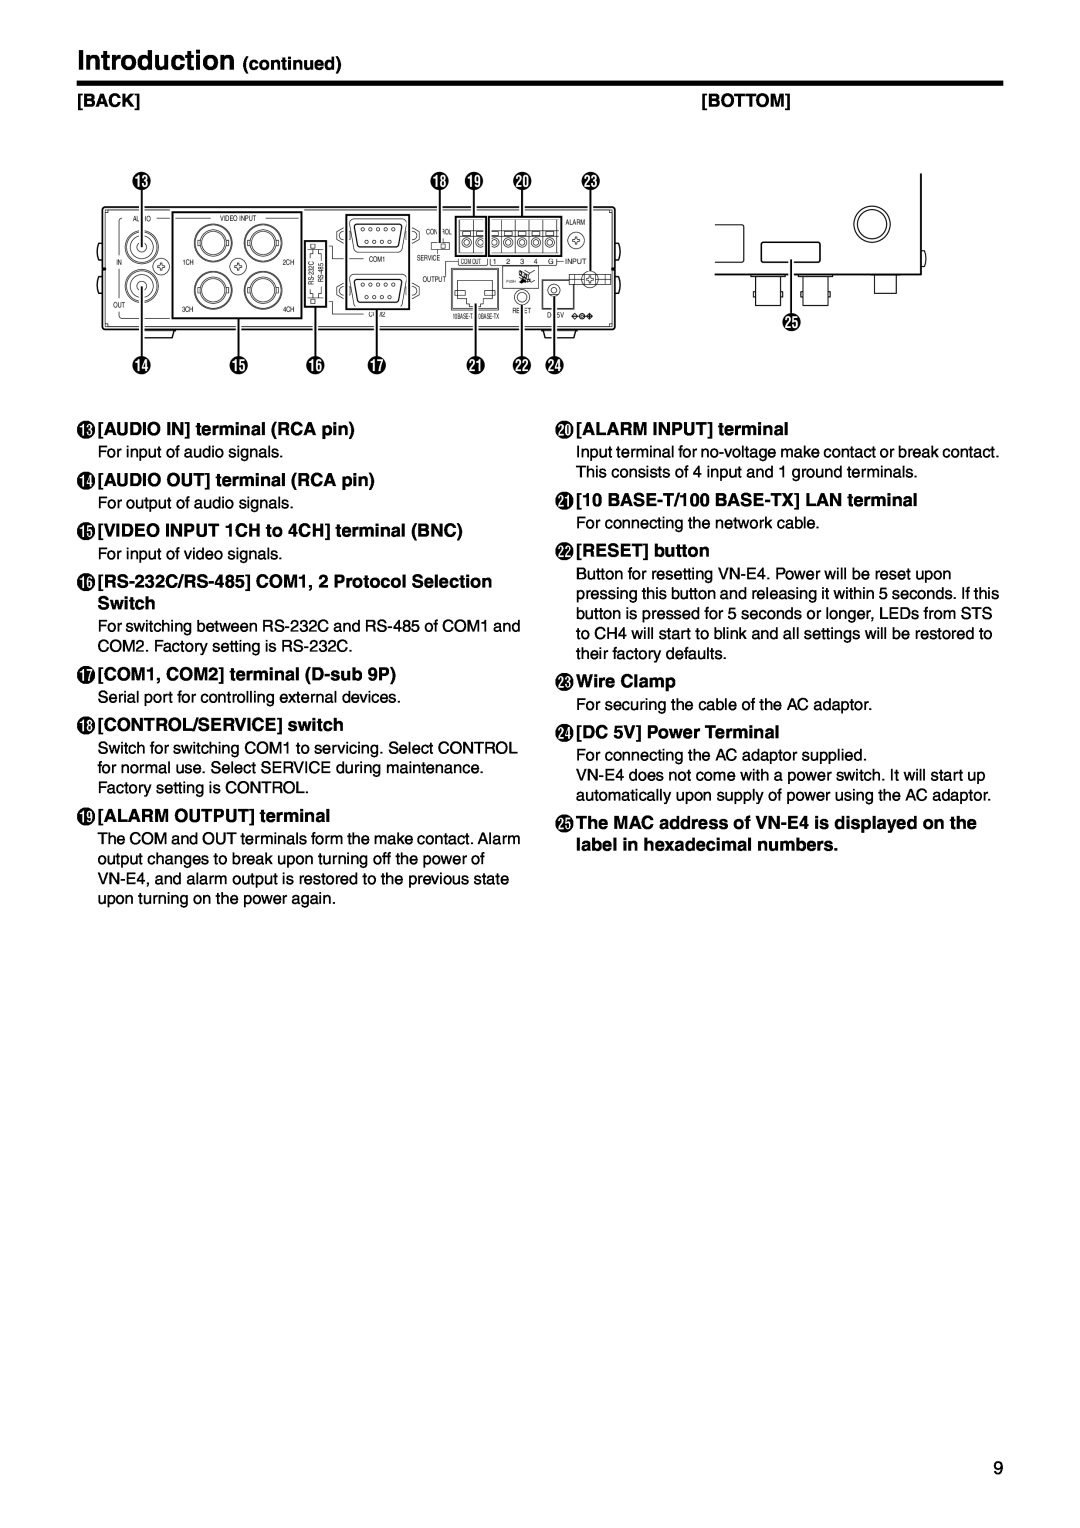 JVC VN-E4 manual Introduction continued, Back 